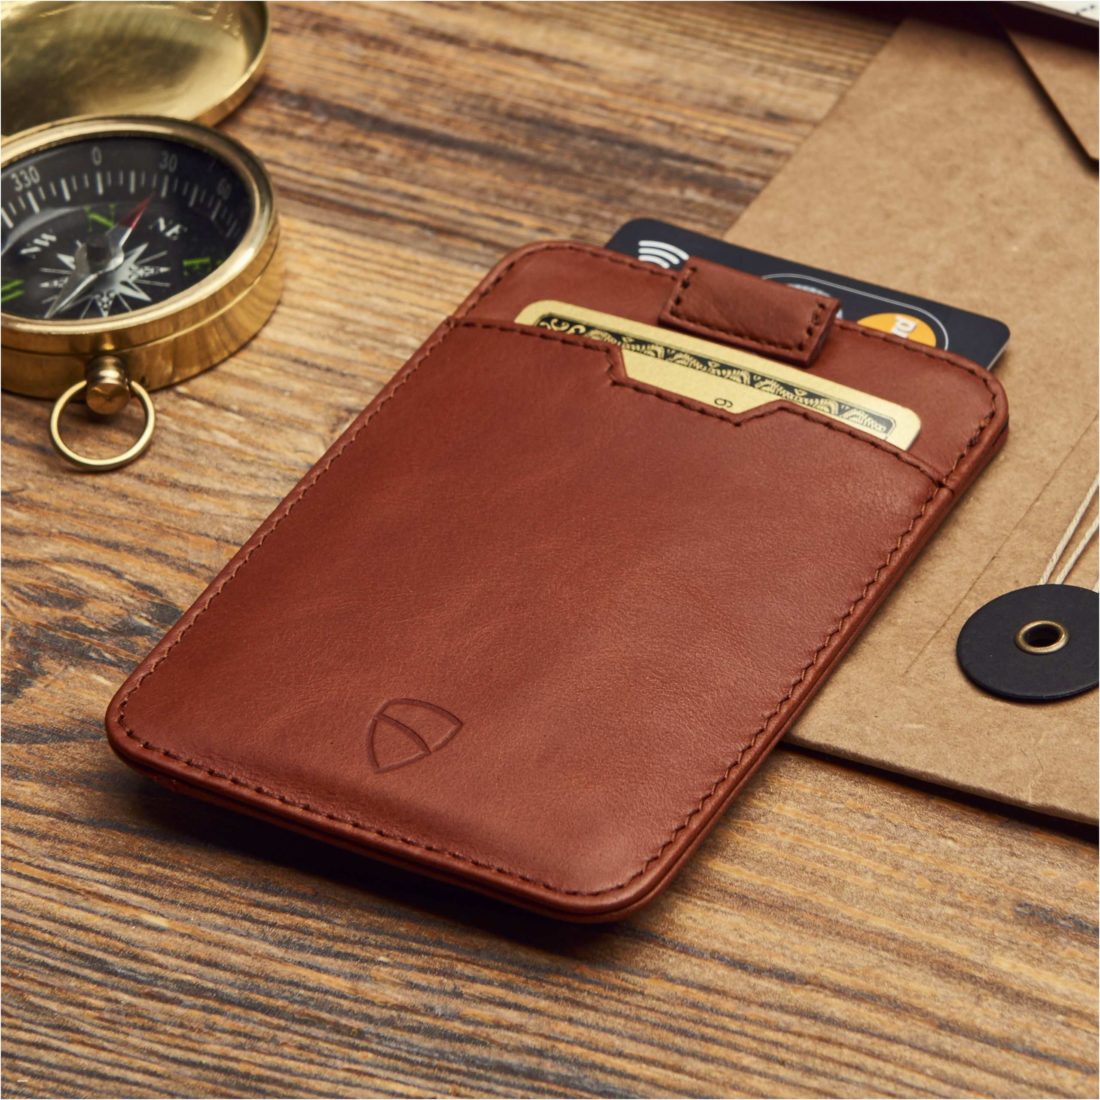 Top 5 Cool Wallets for Men With Style » Men's Guide